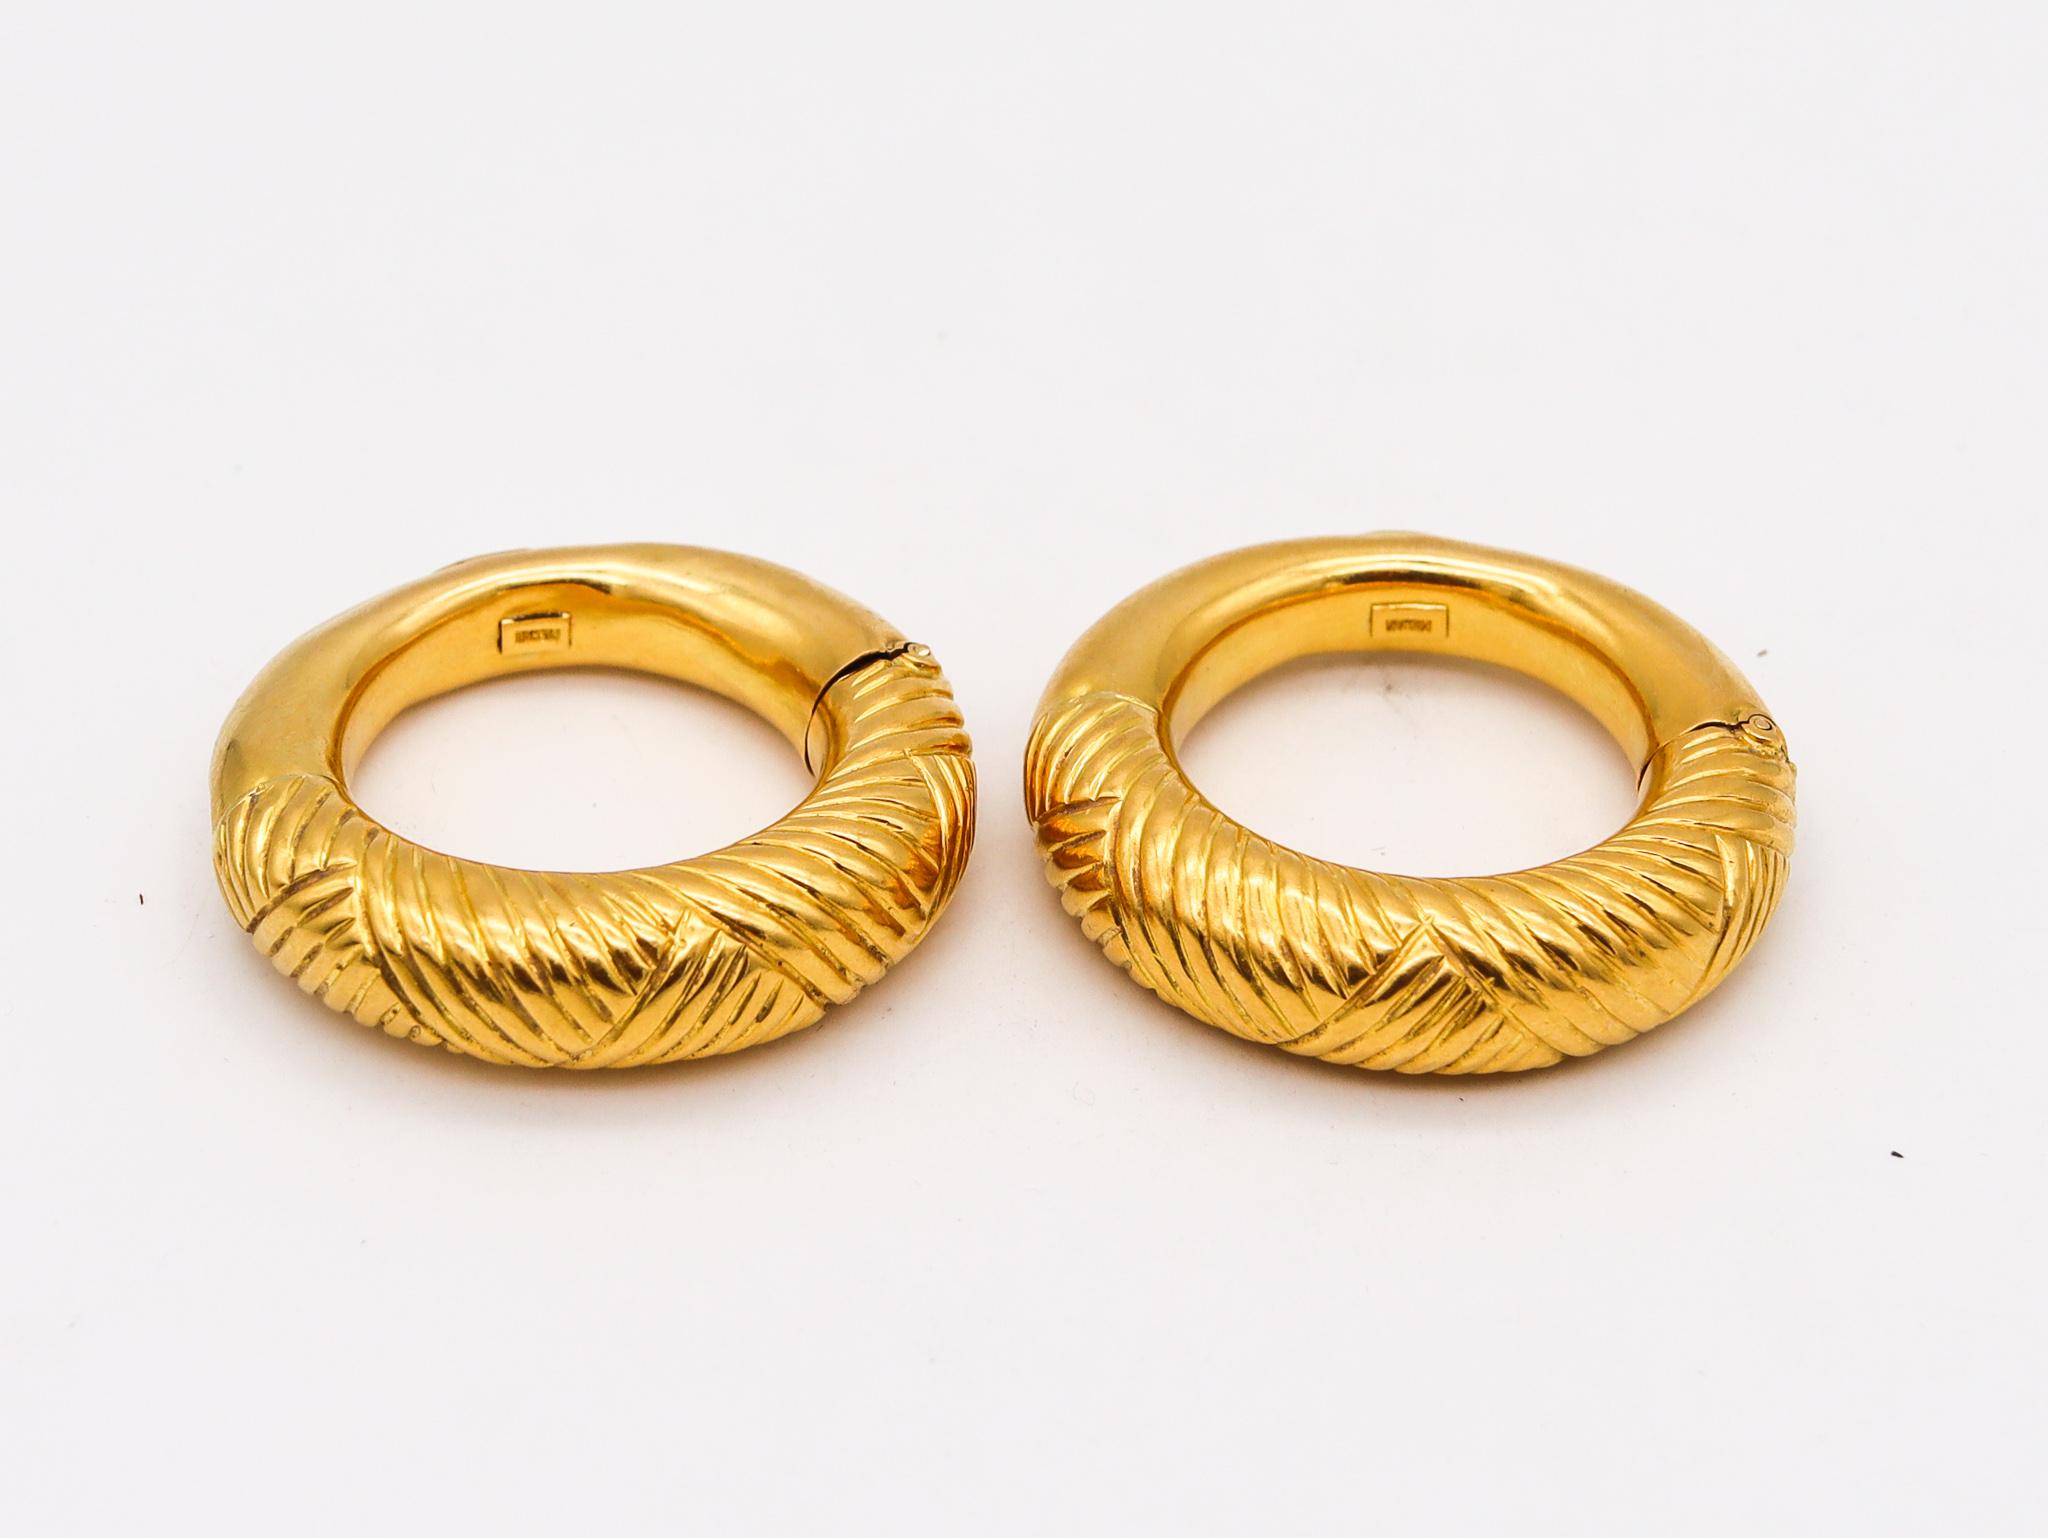 A pair of hoops earrings designed by Ilias Lalaounis.

Gorgeous pair of hoops earrings, created in Greece by the jewelry house of Ilias Lalaounis, back in the 1970's. These beautiful vintage and bold pair are part of the collection named the Minoans